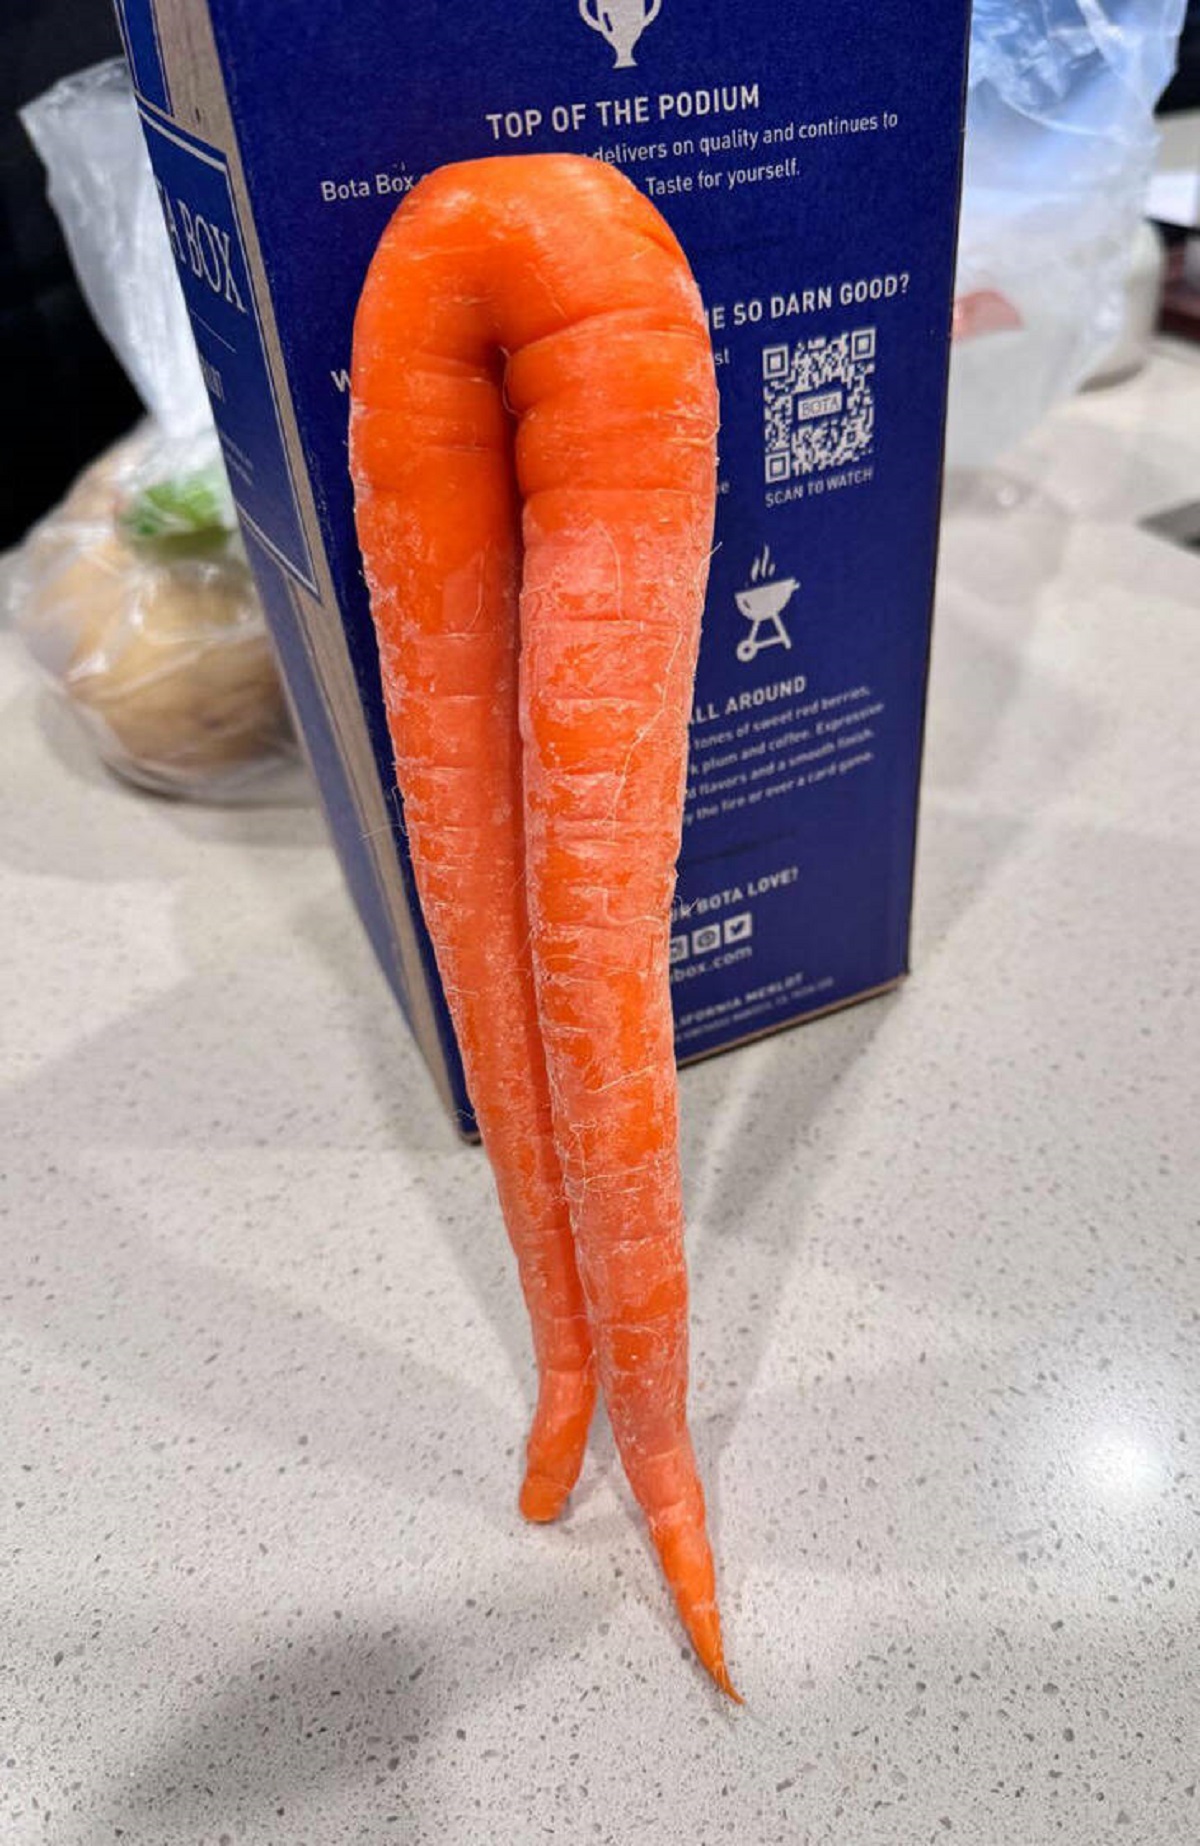 “Found this voluptuous carrot at the grocery store.”